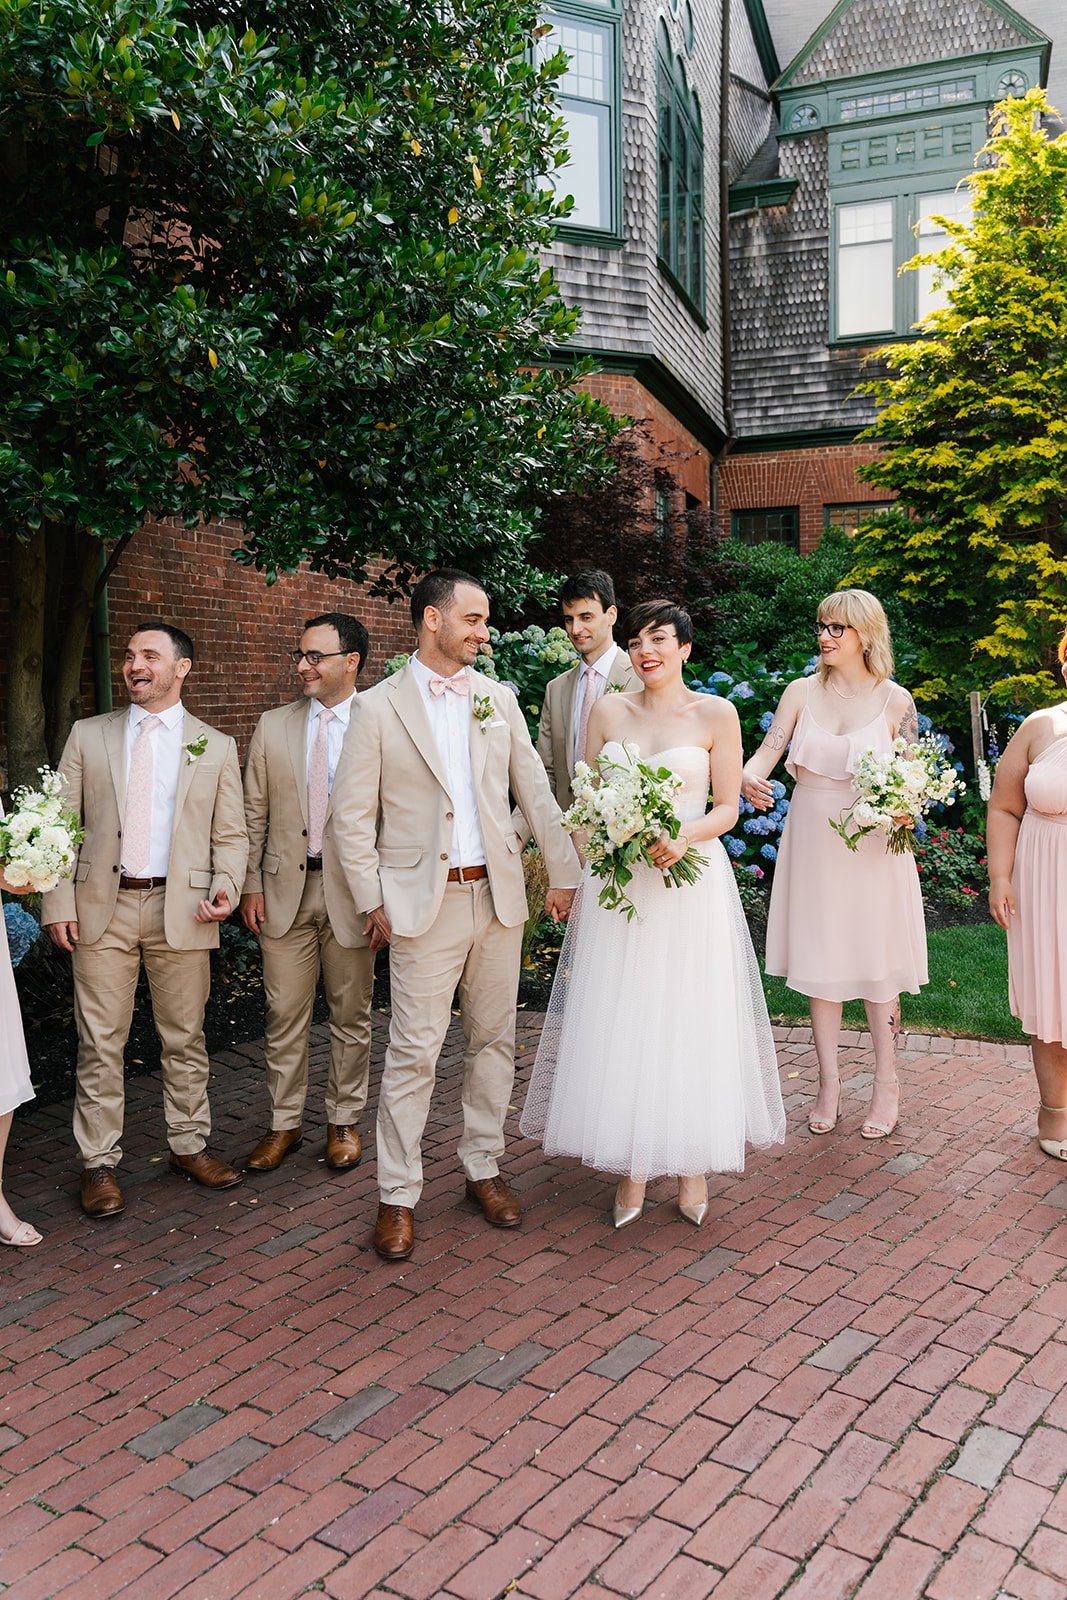 Tan and baby pink bridal party attire